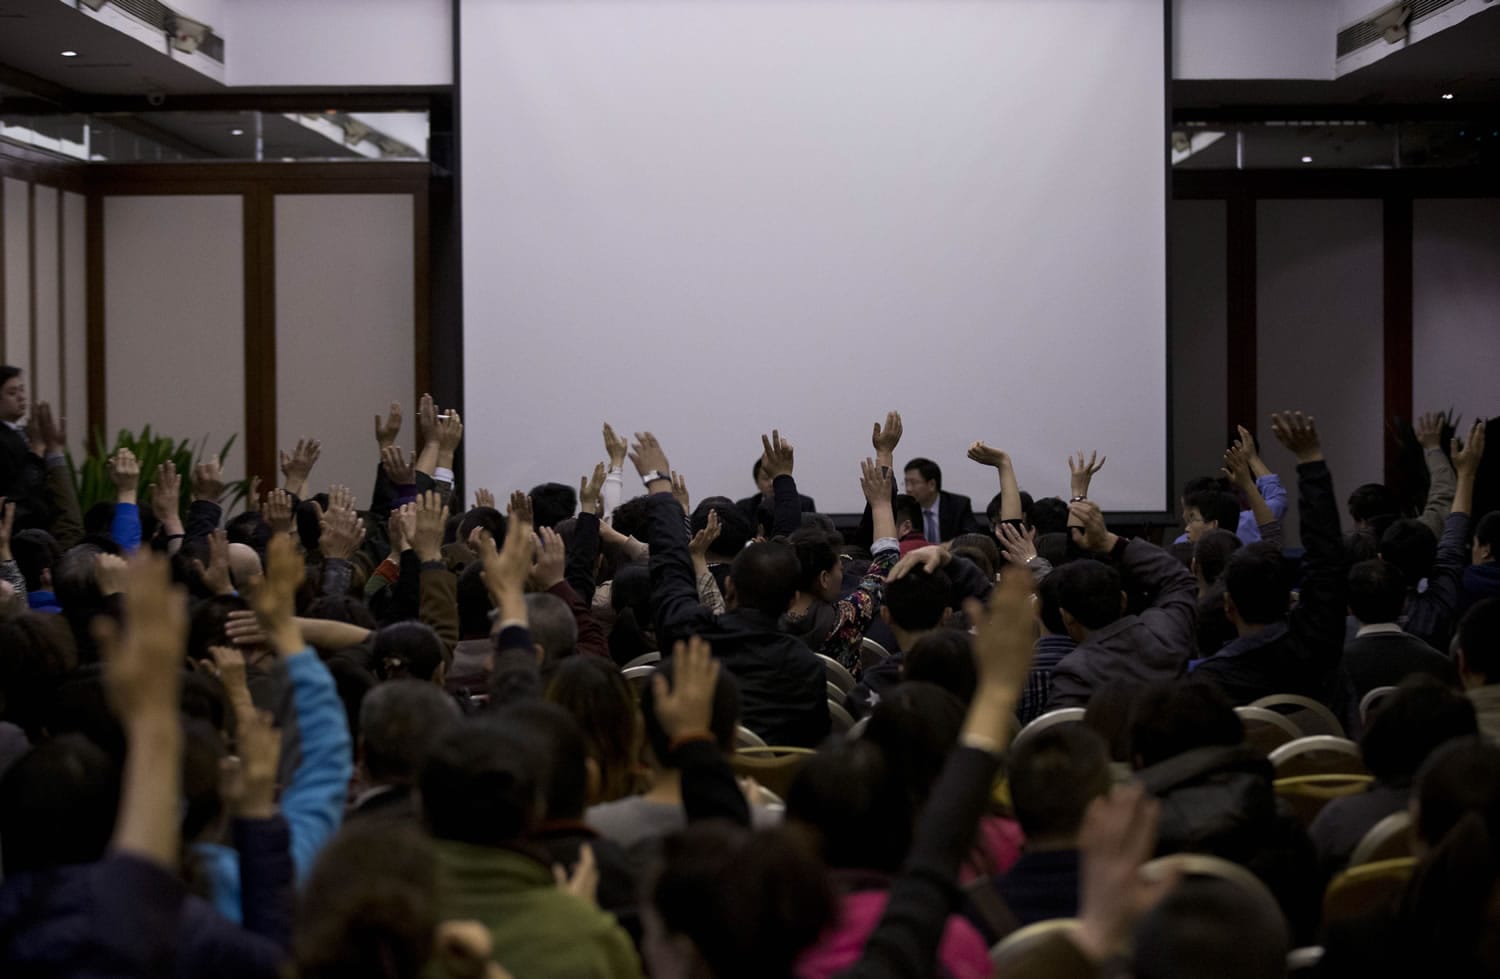 Relatives of Chinese passengers aboard the missing Malaysia Airlines Flight MH370 raise their hands to question Malaysian government officials during a news briefing held by the airlines at a hotel ballroom in Beijing on Monday.